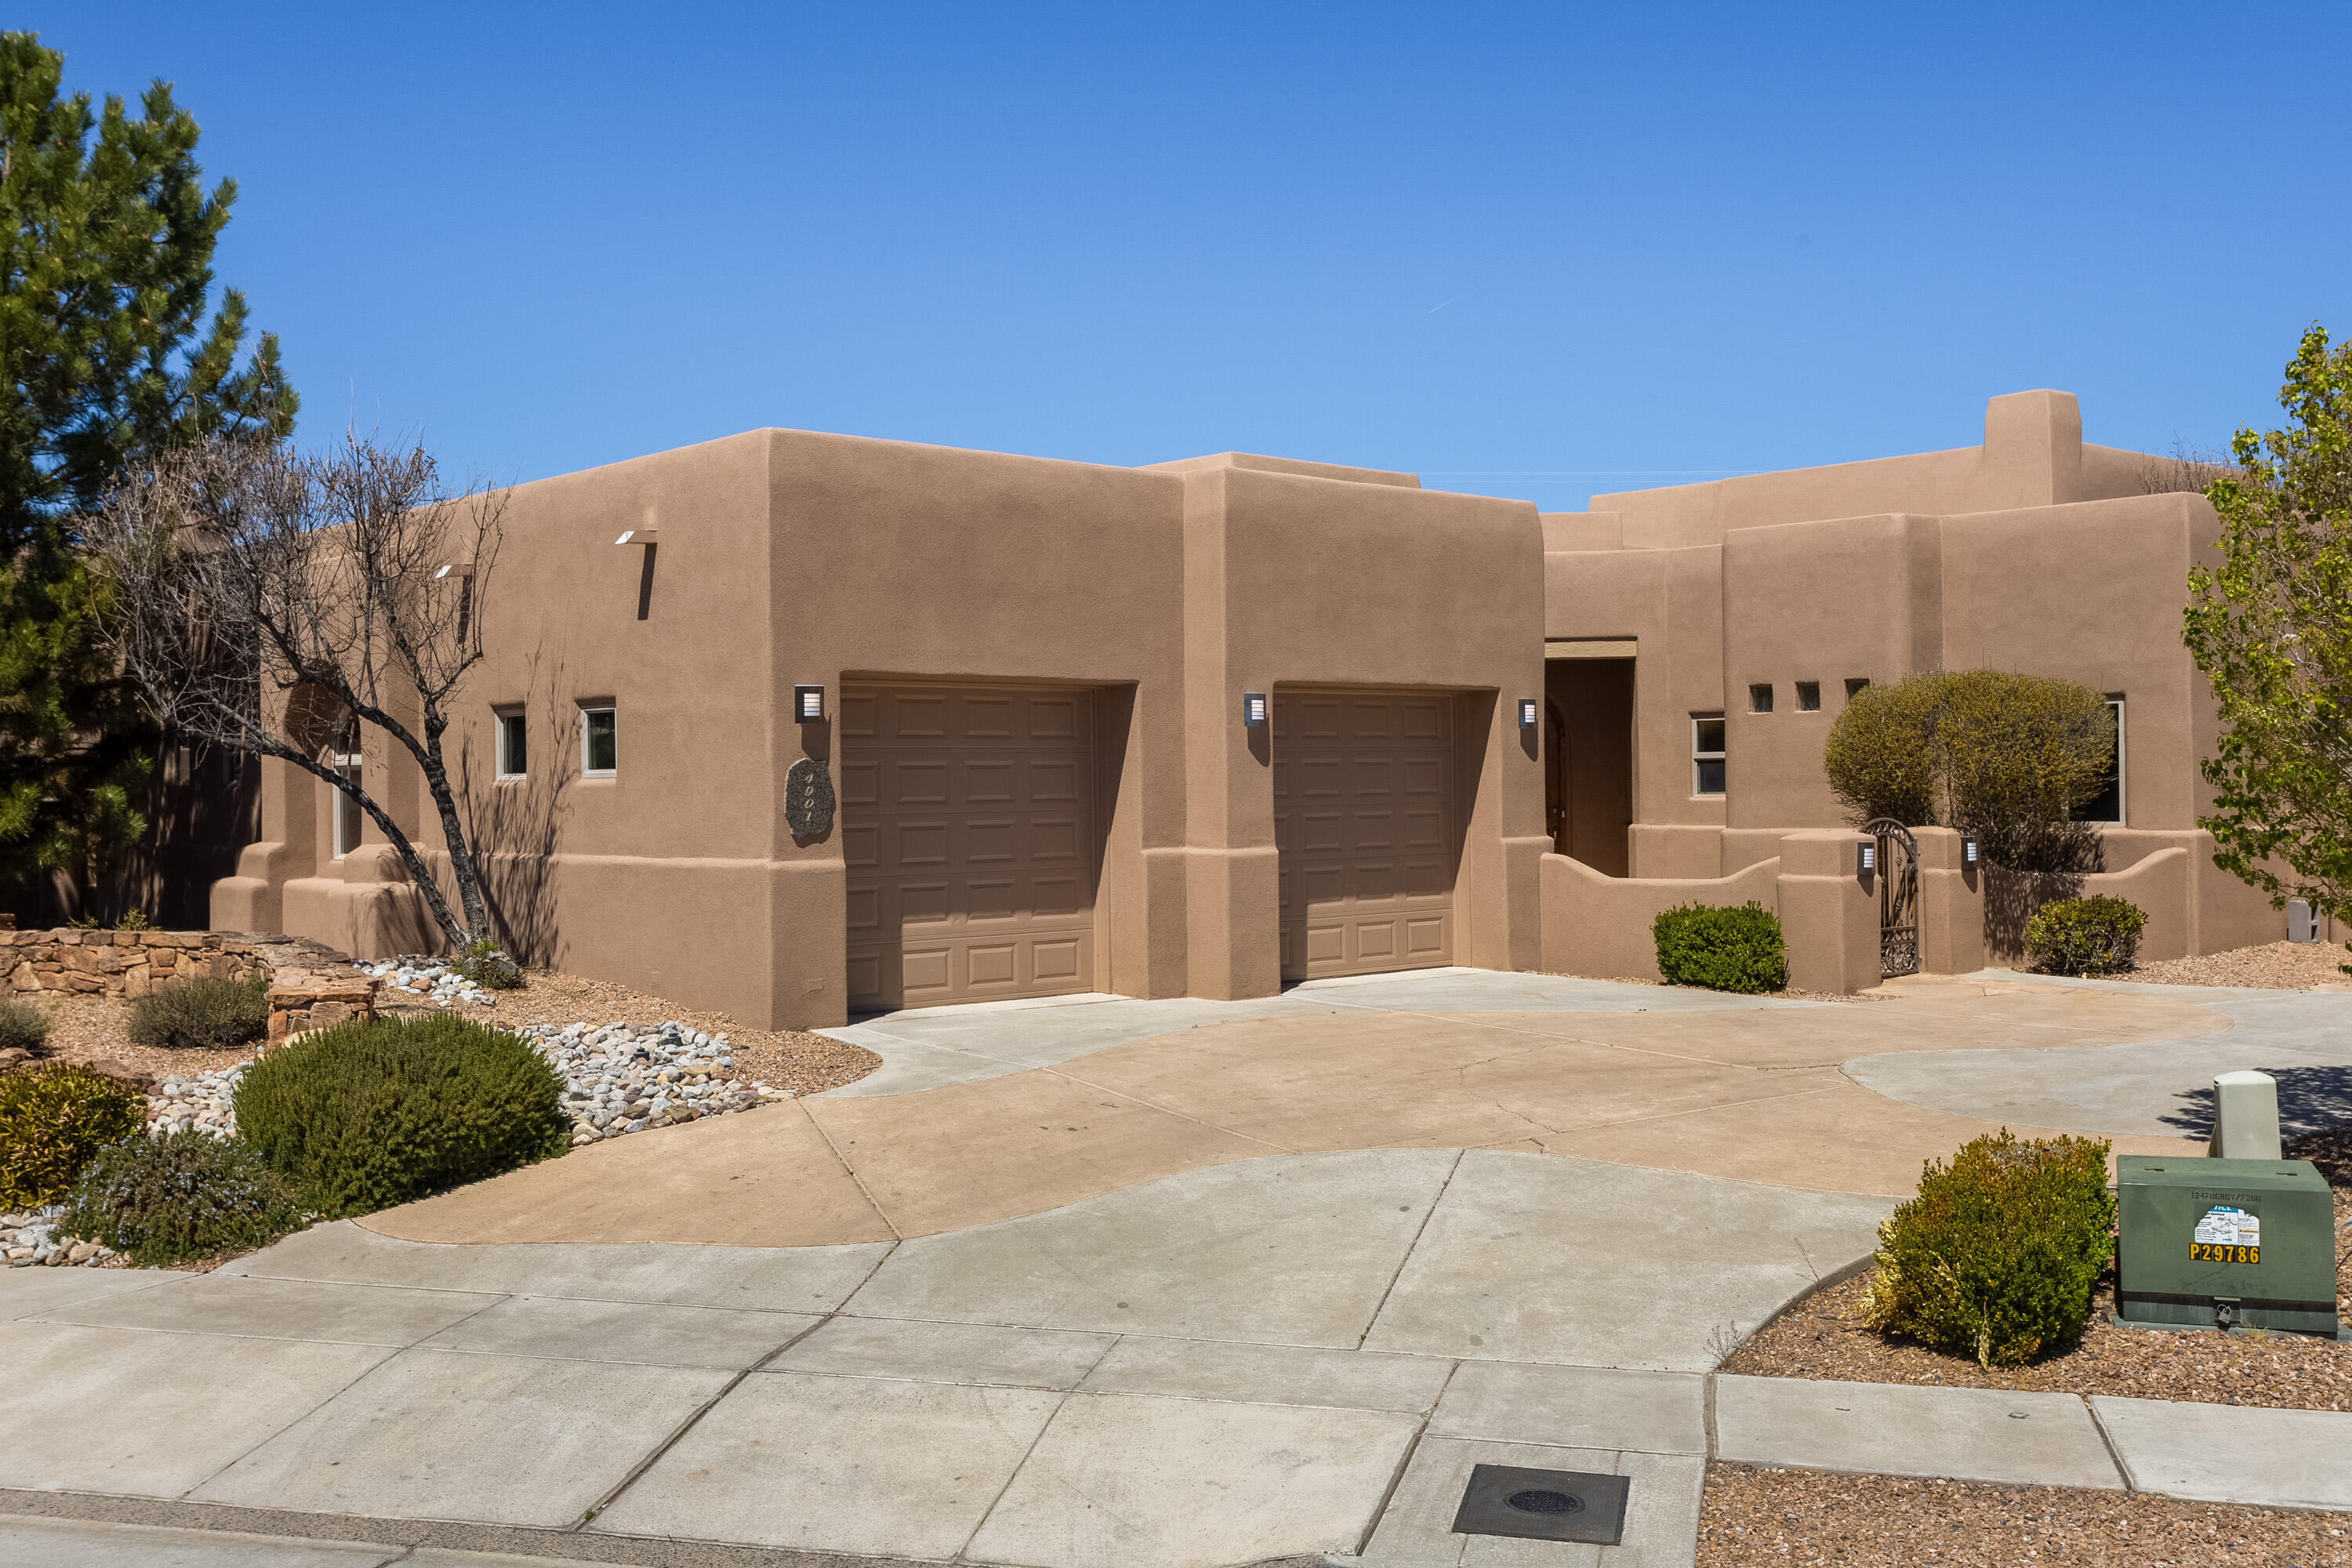 4901 Valle Rio Trail NW, Albuquerque, New Mexico 87120, 4 Bedrooms Bedrooms, ,3 BathroomsBathrooms,Residential,For Sale,4901 Valle Rio Trail NW,1061569